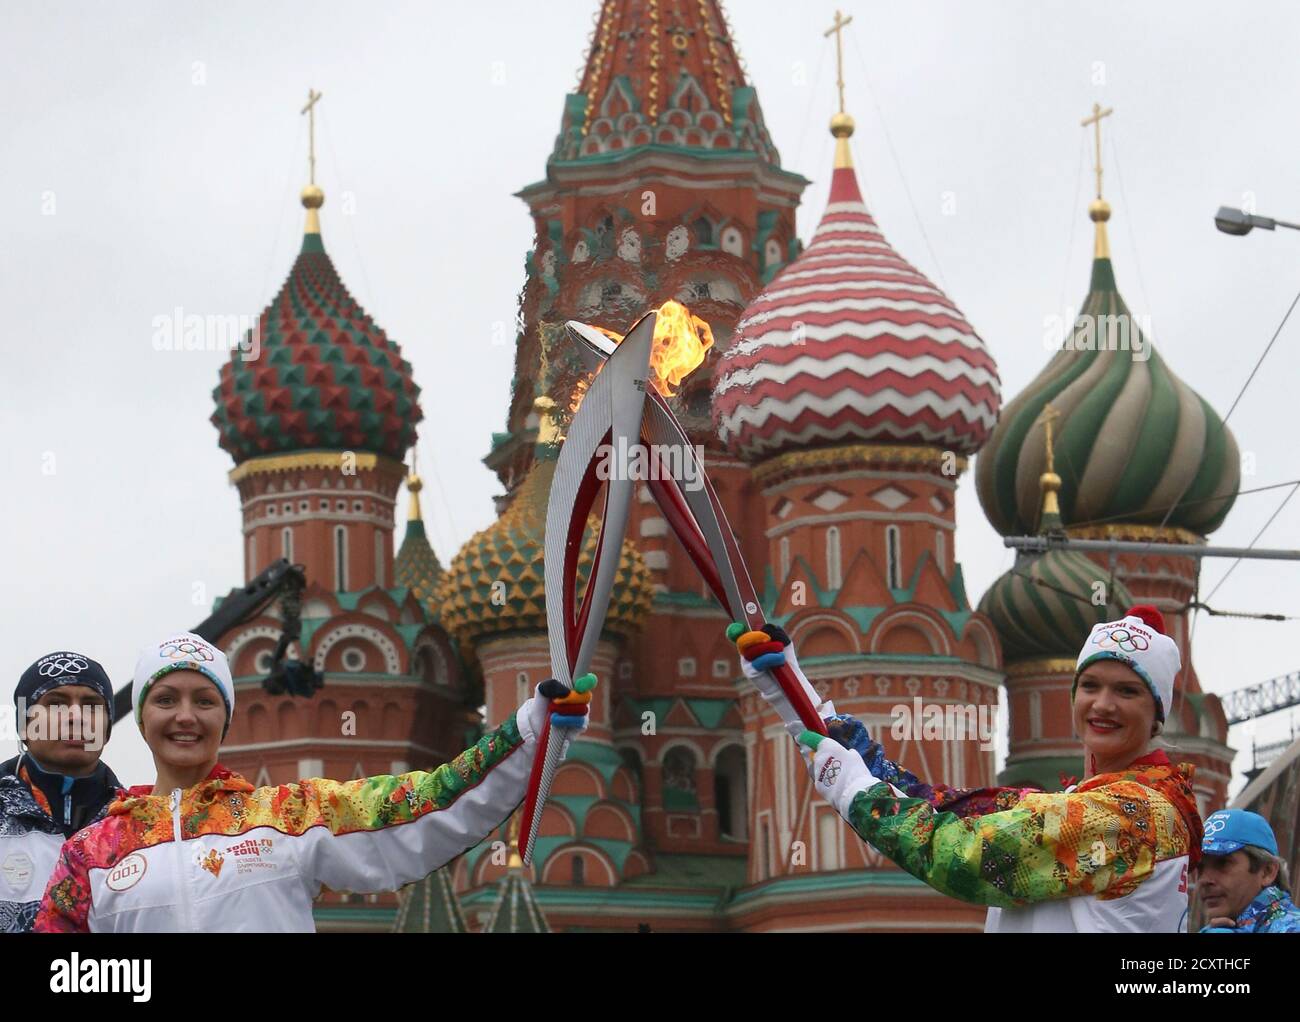 rod beskyldninger angre Olympic champions, synchronised swimmer Anastasia Davydova (2nd L) and  artistic gymnast Svetlana Khorkina (2nd R), take part in the Sochi 2014  Winter Olympic torch relay, with St. Basil's cathedral seen in the